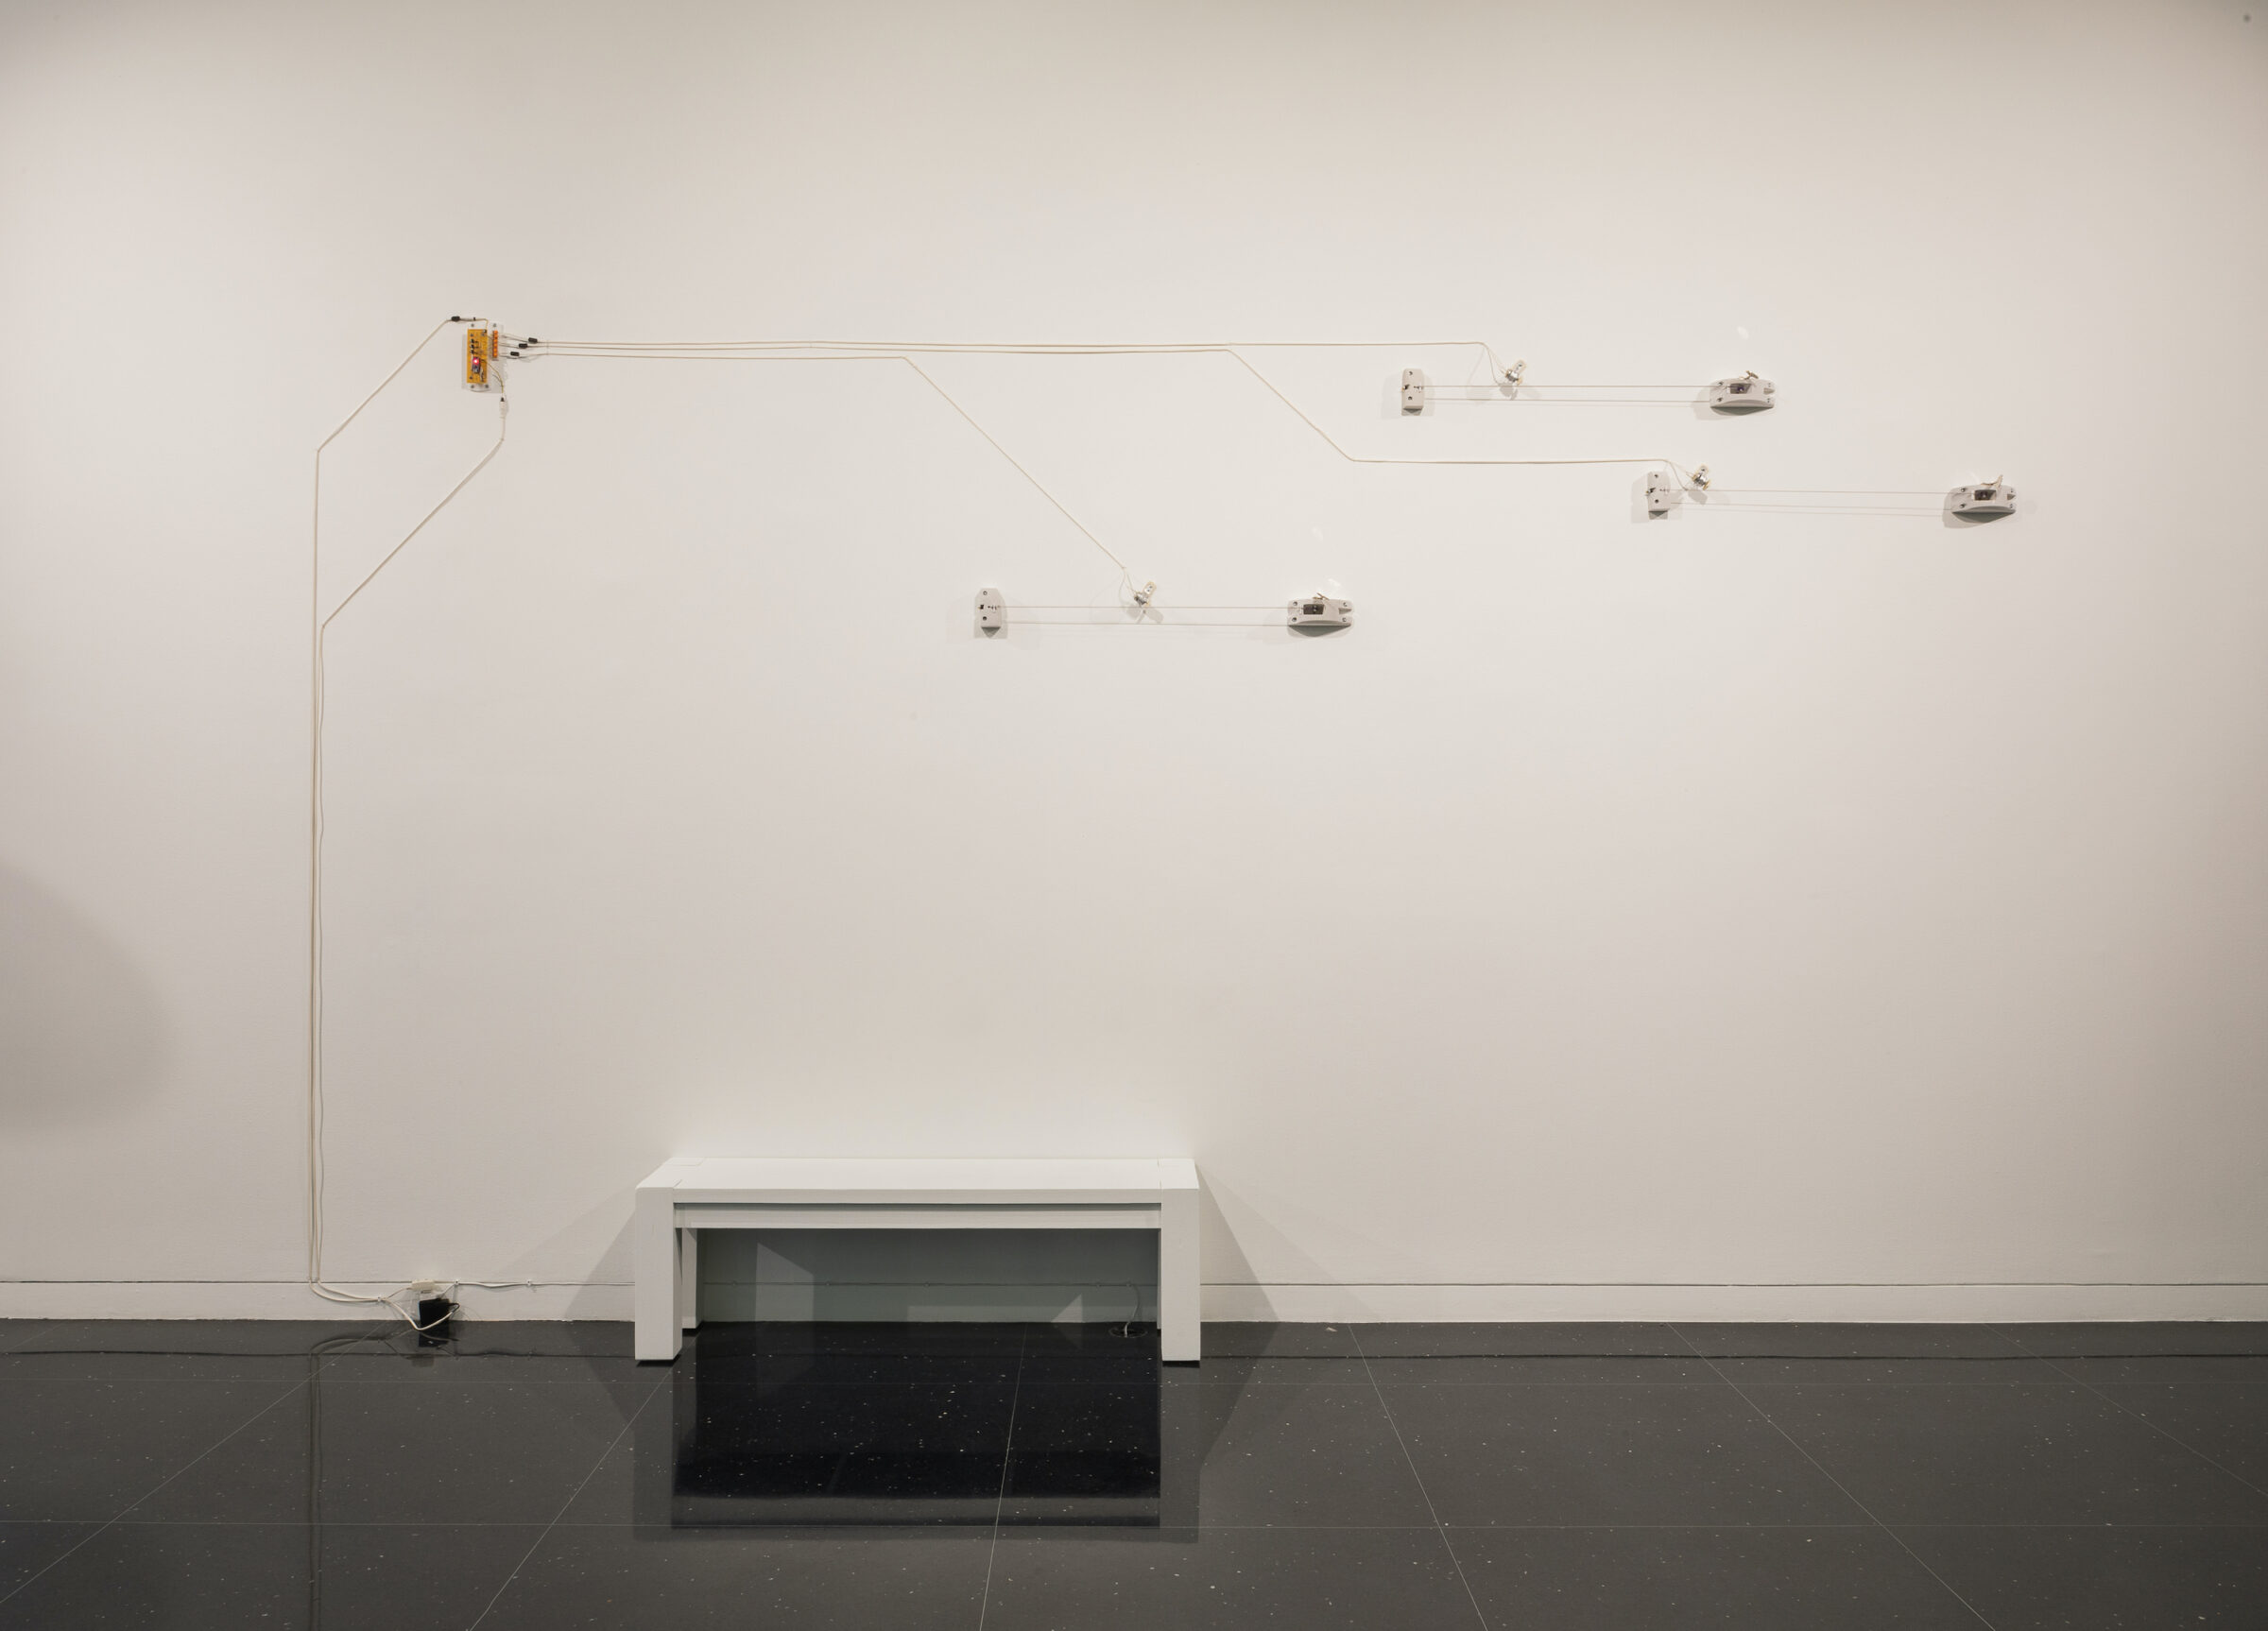 A series of nodes and wires installed on gallery walls. Underneath the installation sits a white bench.